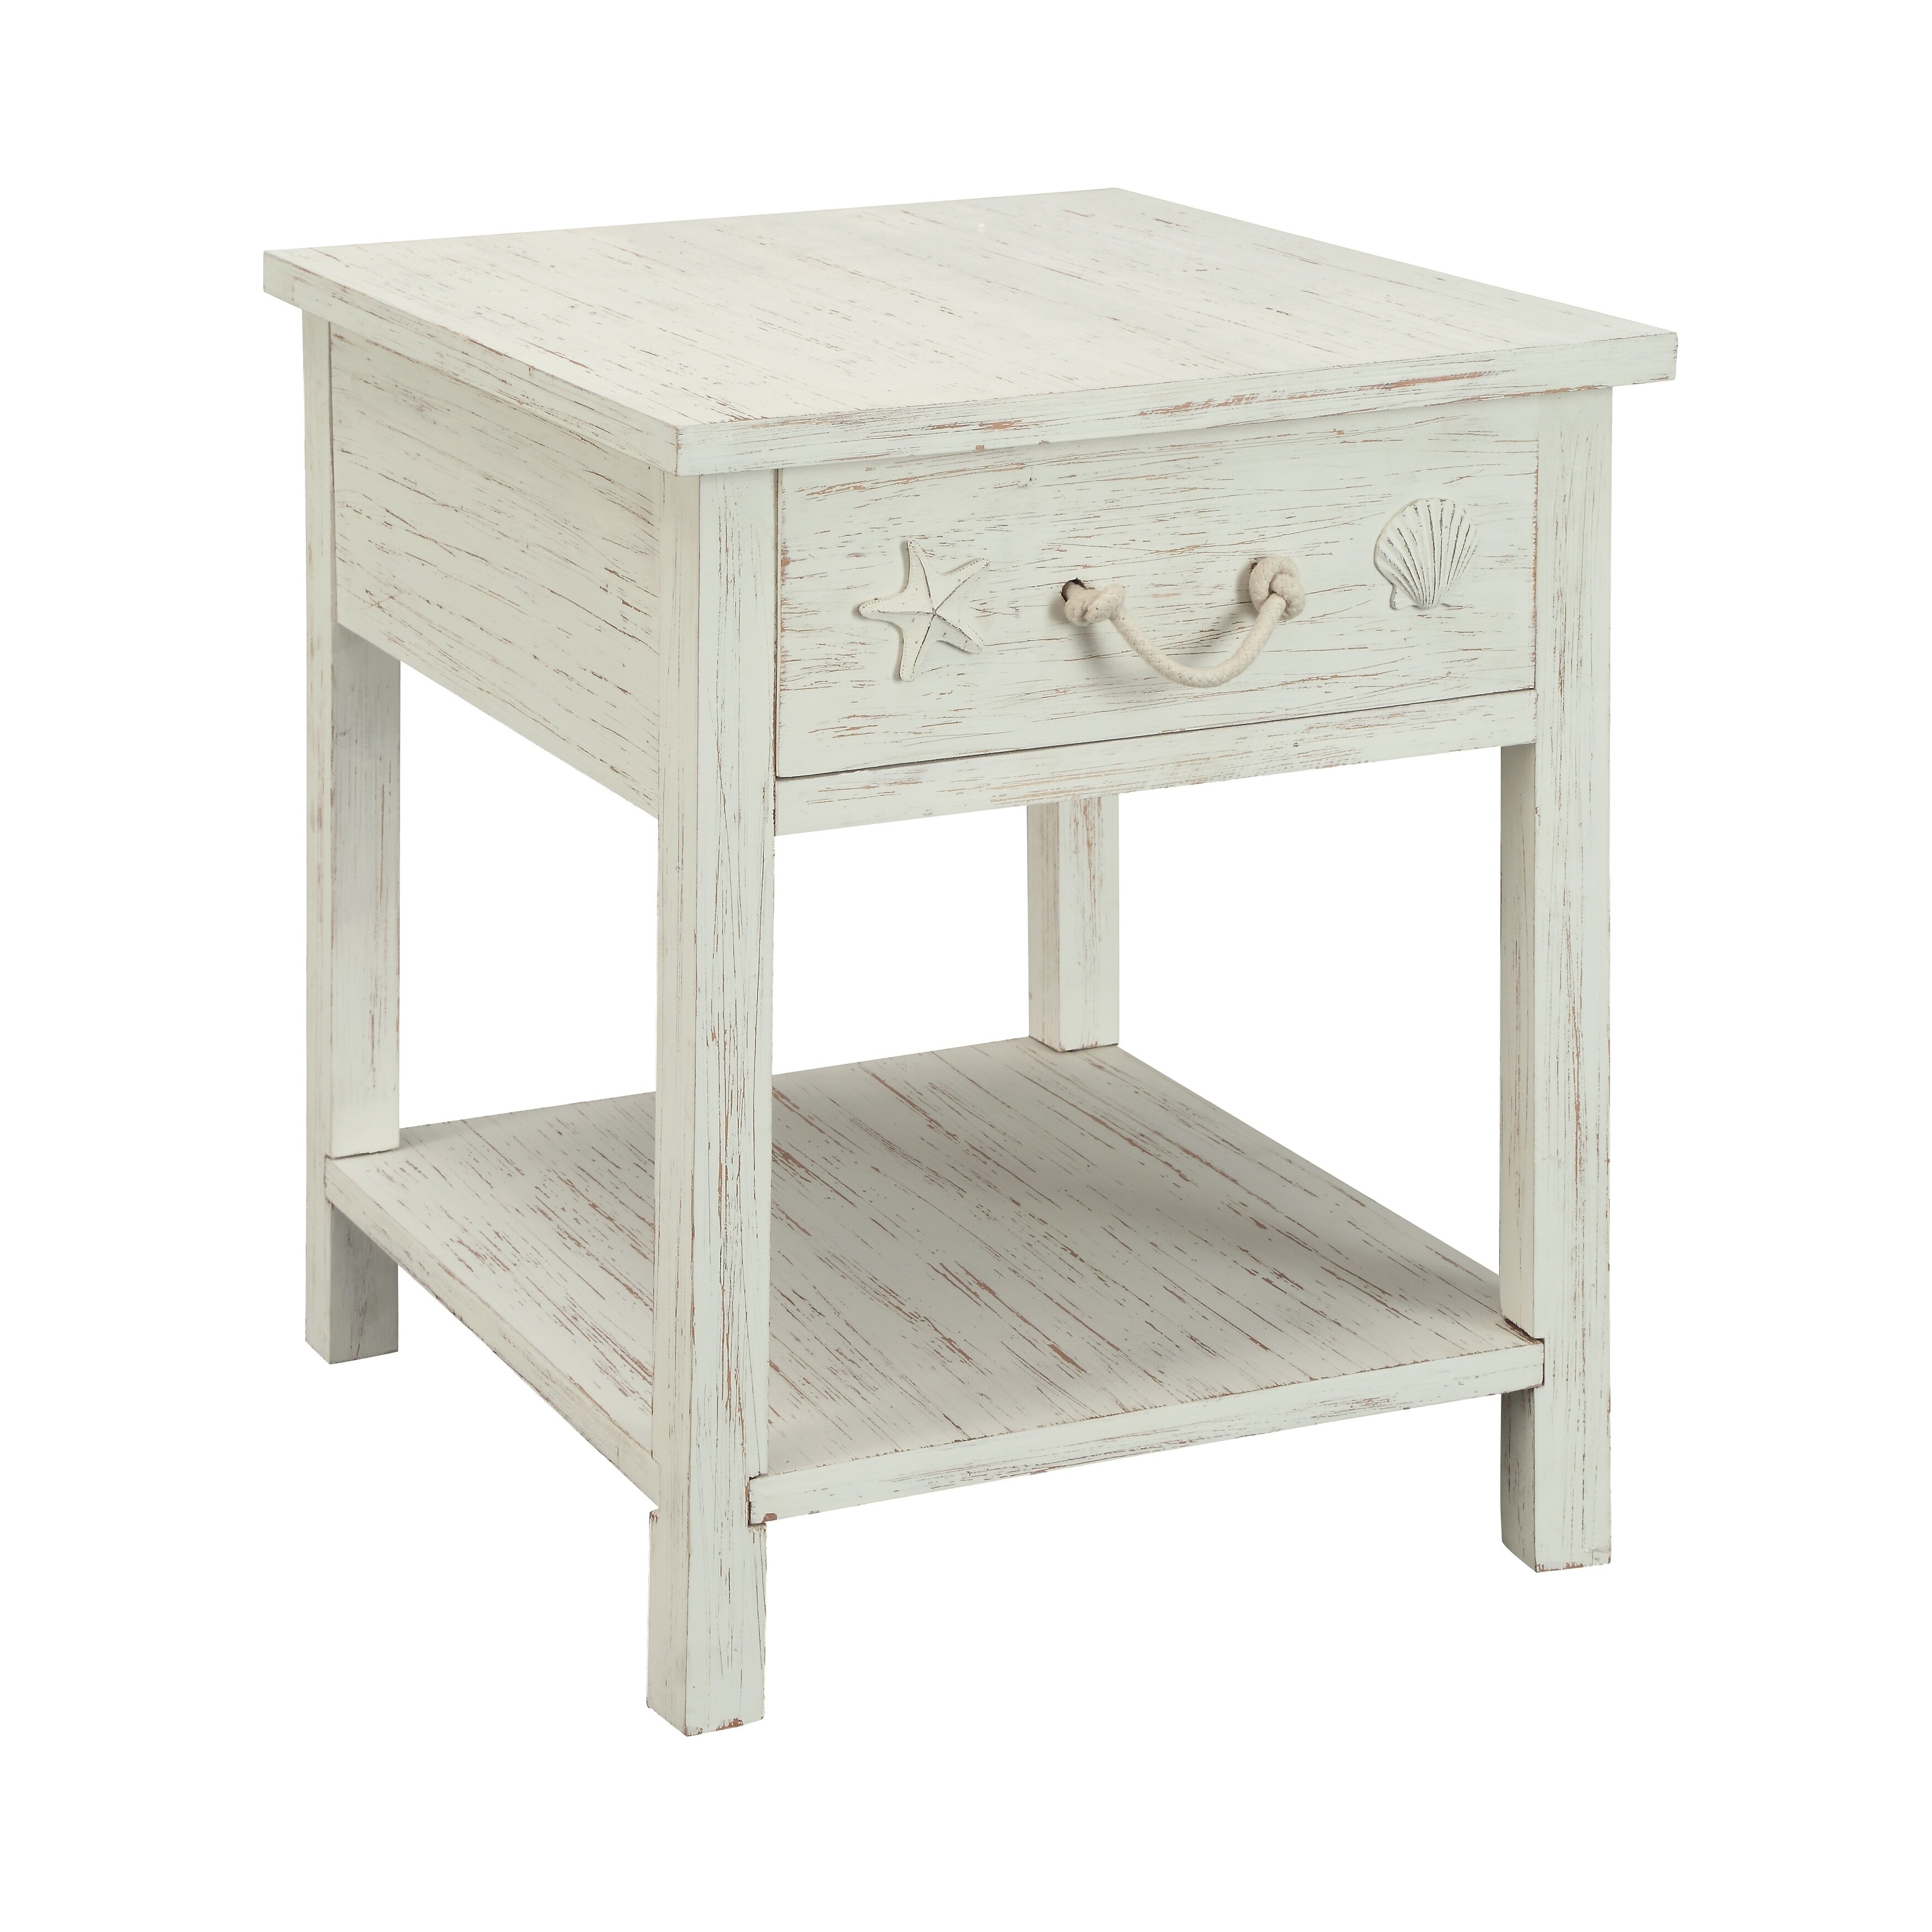 sanibel one drawer end table free shipping today how many inches between coffee and sofa wedge magnussen ashby western tables magnolia furniture line glass wood lamp whalen sorano